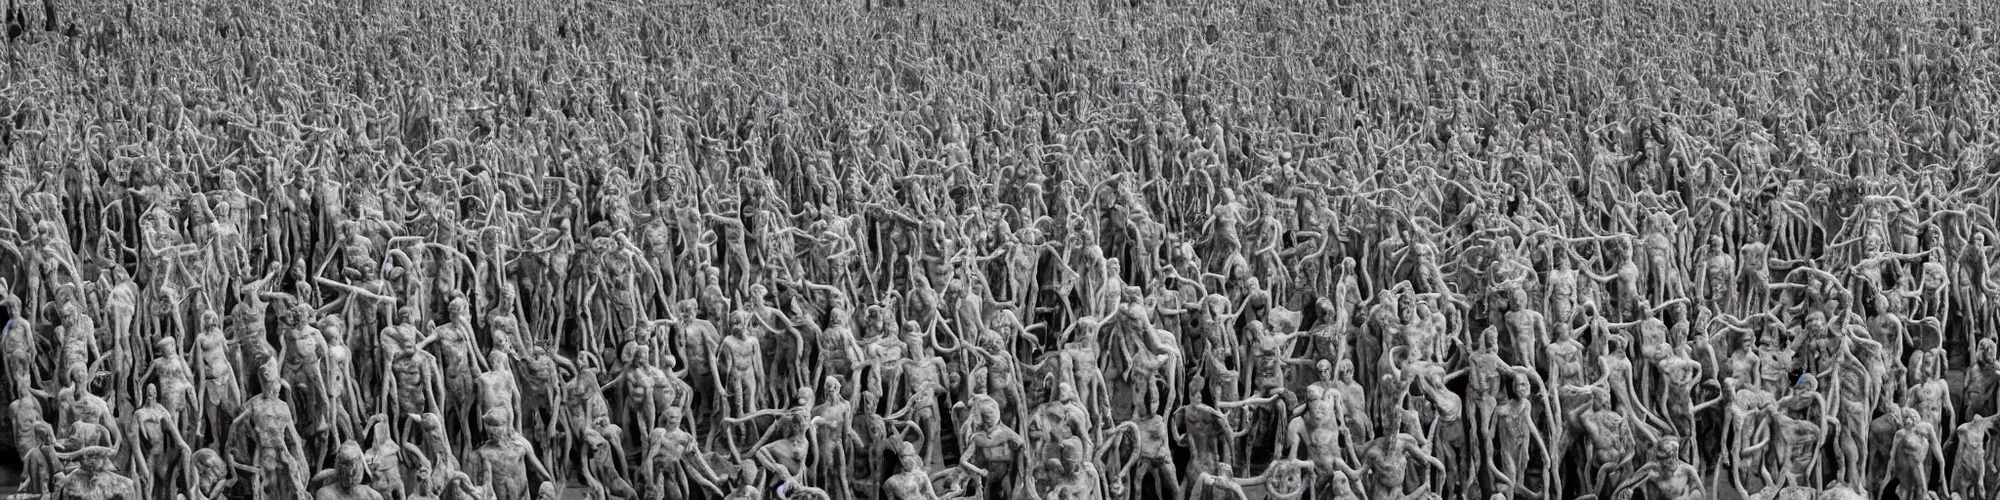 Prompt: hundreds of humans. A sea of humans. interconnected flesh. Crowdcrush. Many humans intertwined and woven together. Bodies and forms amesh. Extremely unsettling artwork. Screaming humans. The overall vibe is doom and despair. Sculpture by Alberto Giacometti.